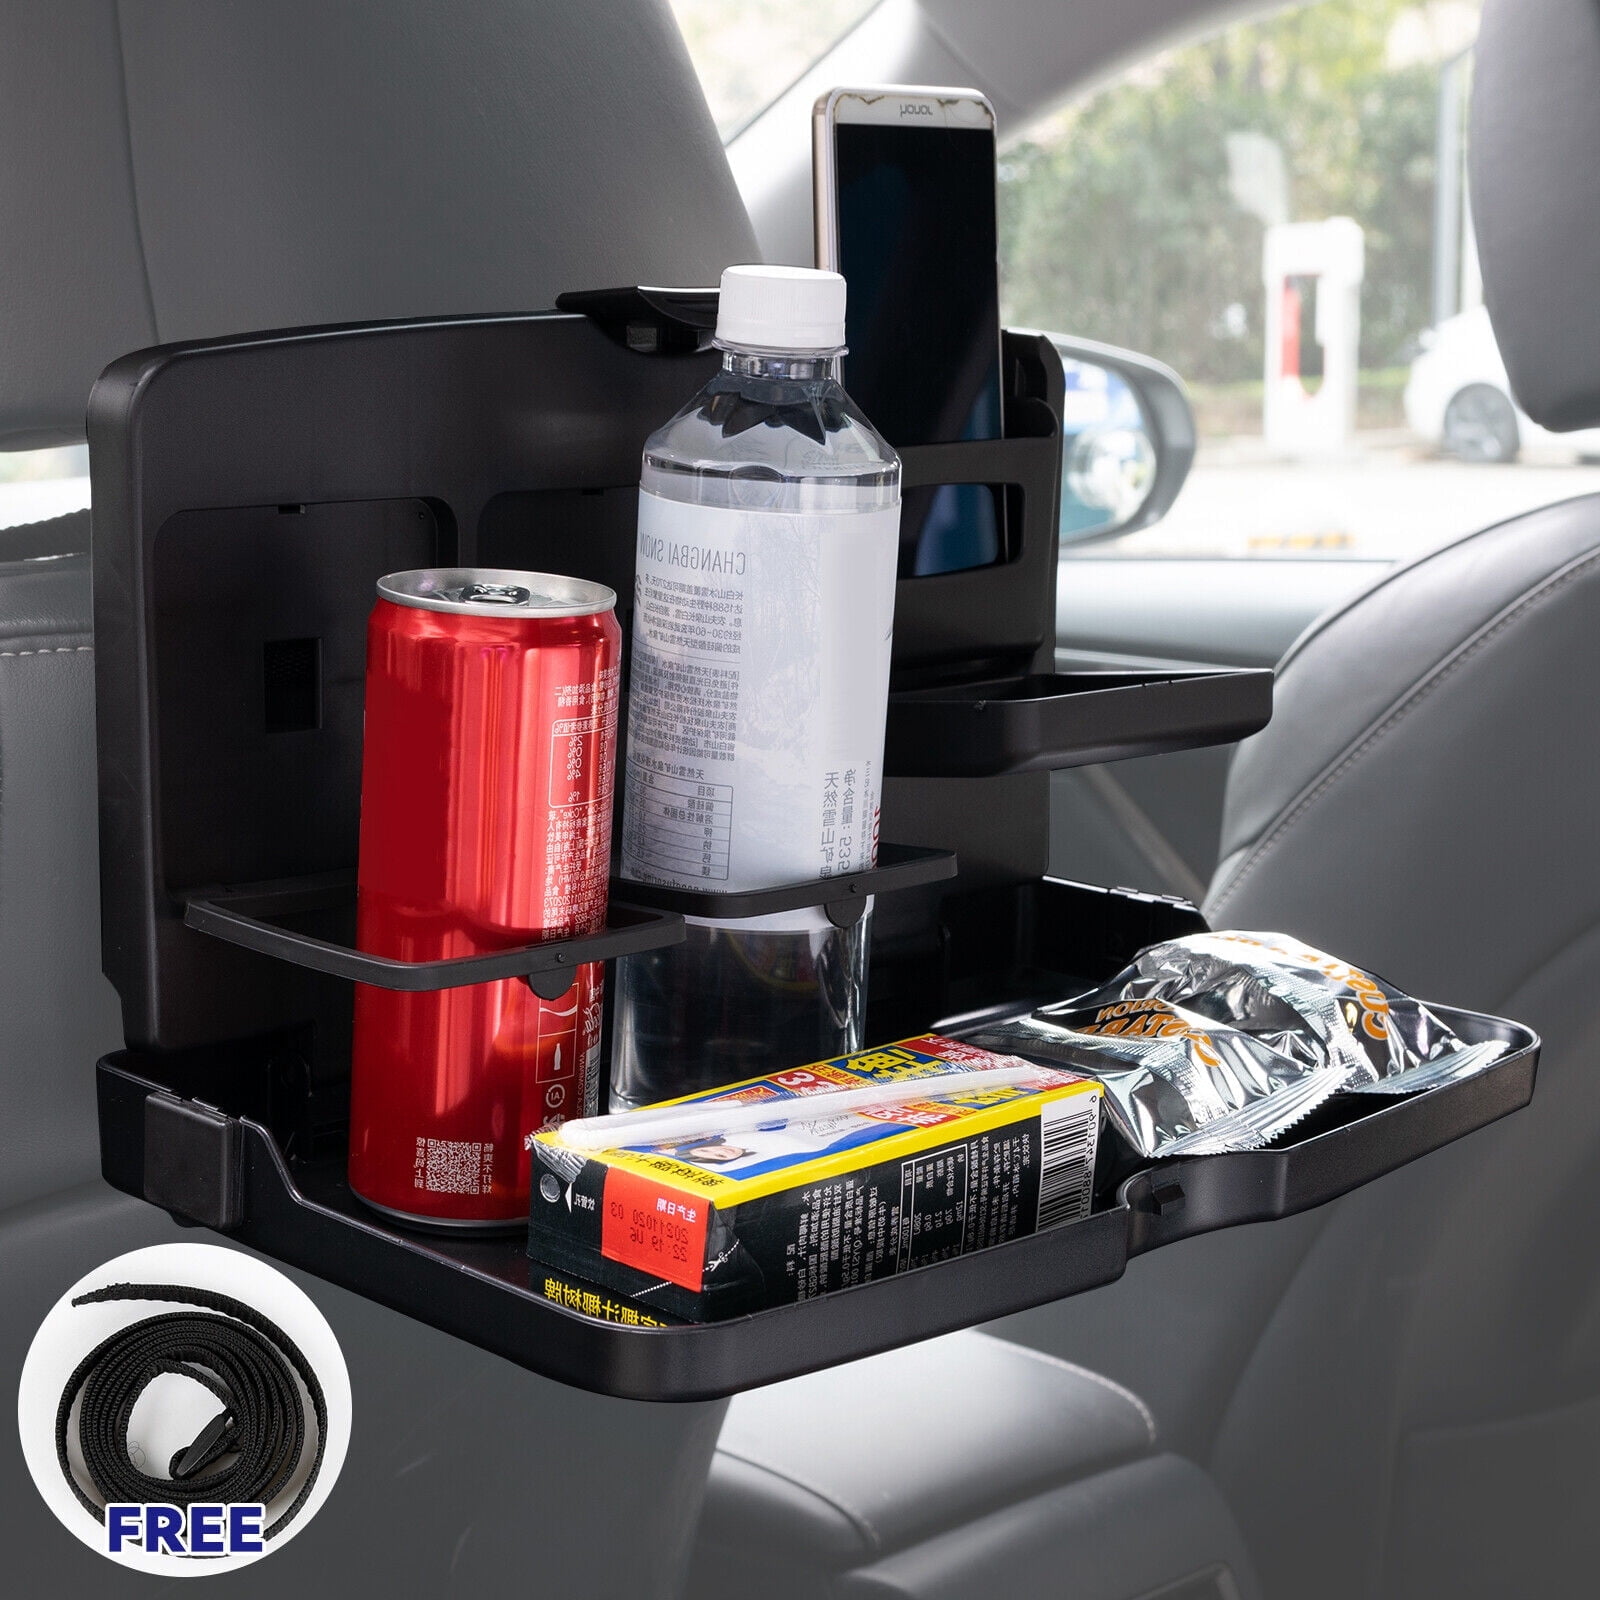 FKOK Multifunction Folding Car Back Seat Table Drink Food Cup